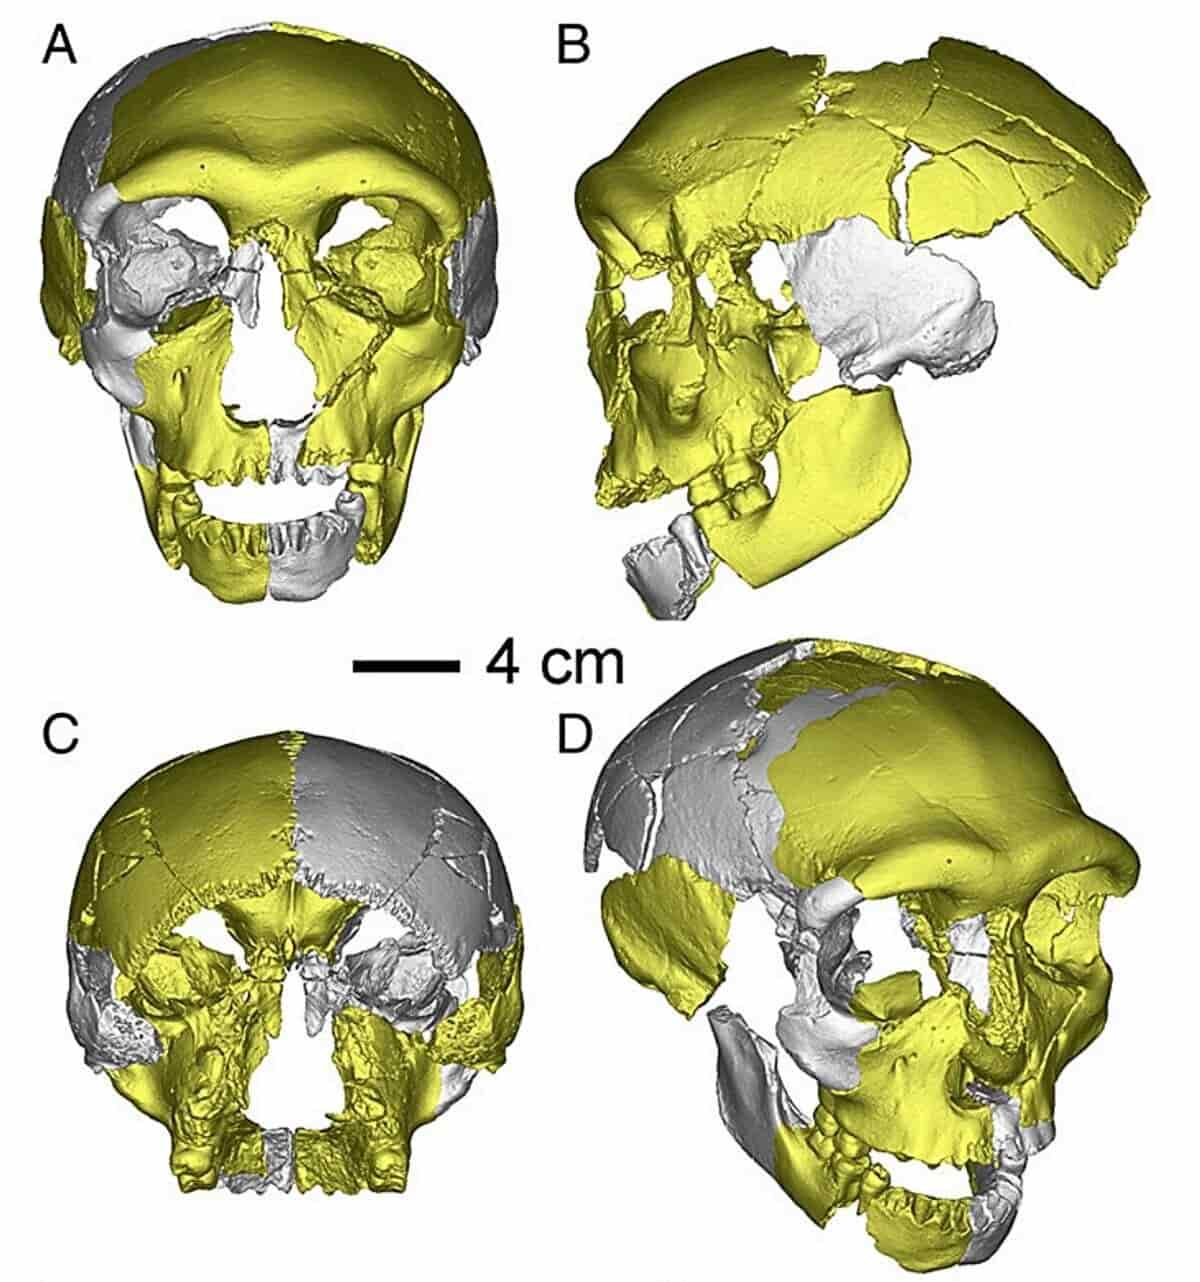 Ancient Skull Found in China Is Unlike Any Human Seen Before